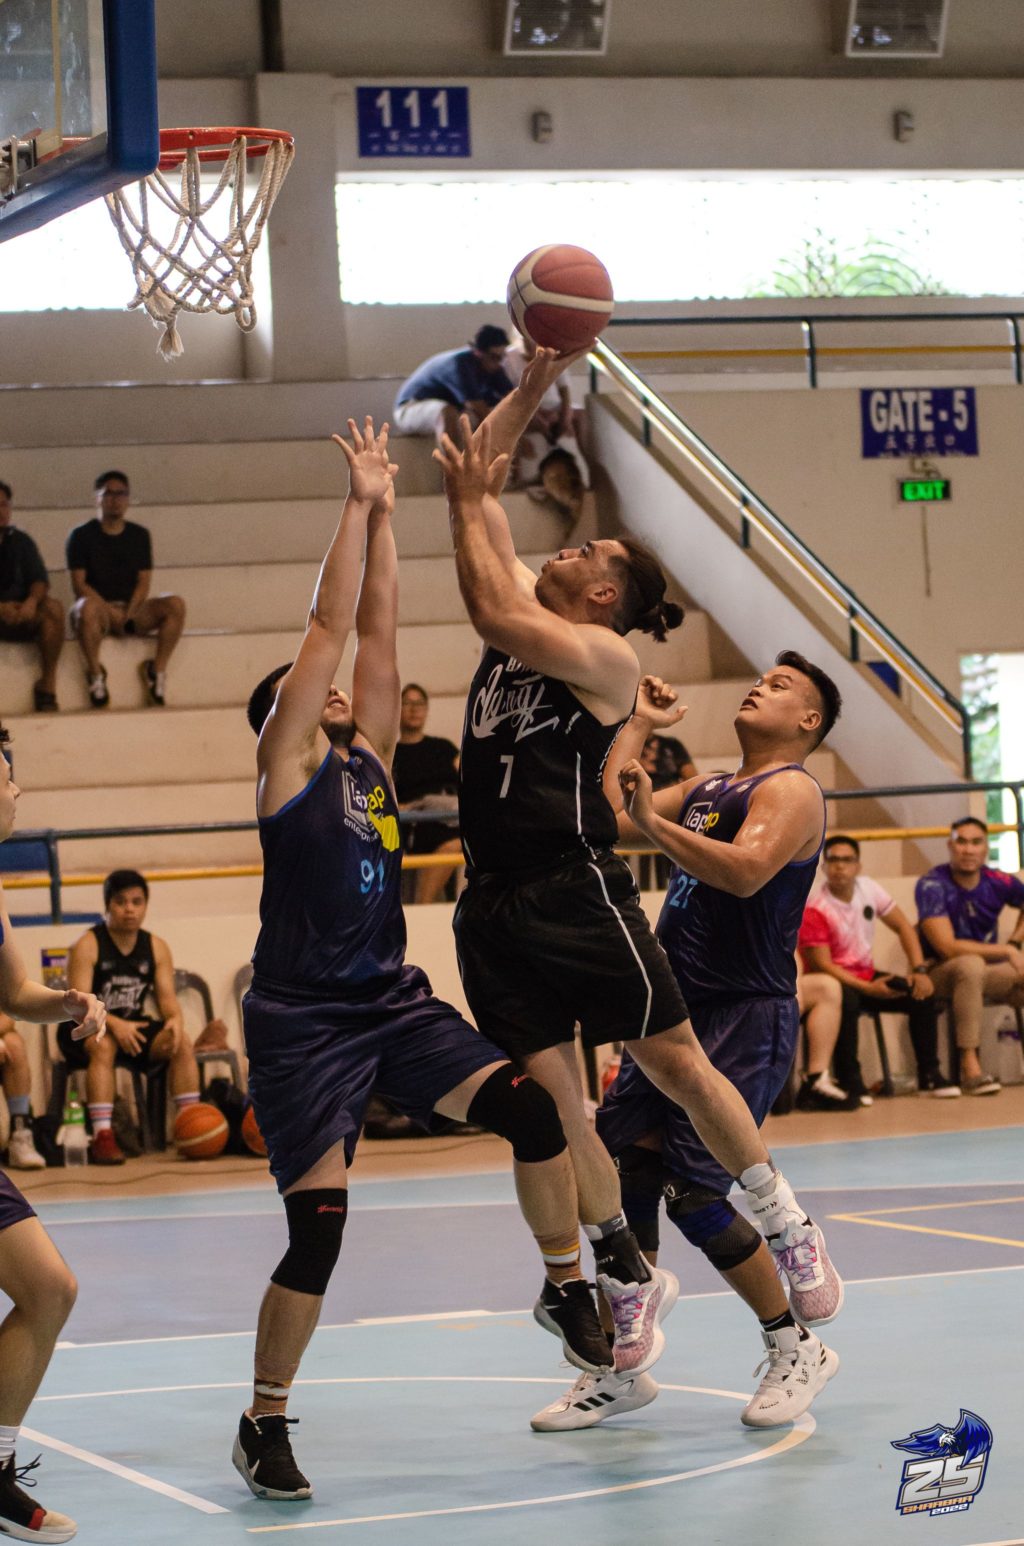 Batch 2007's Christian Leigh Dixon (7) has a double-double performance as he helps his team beat Batch 2006 on Sunday's SHAABAA game at the Magis Eagles Arena in Barangay Canduman, Mandaue City. | 📷: SHAABAA